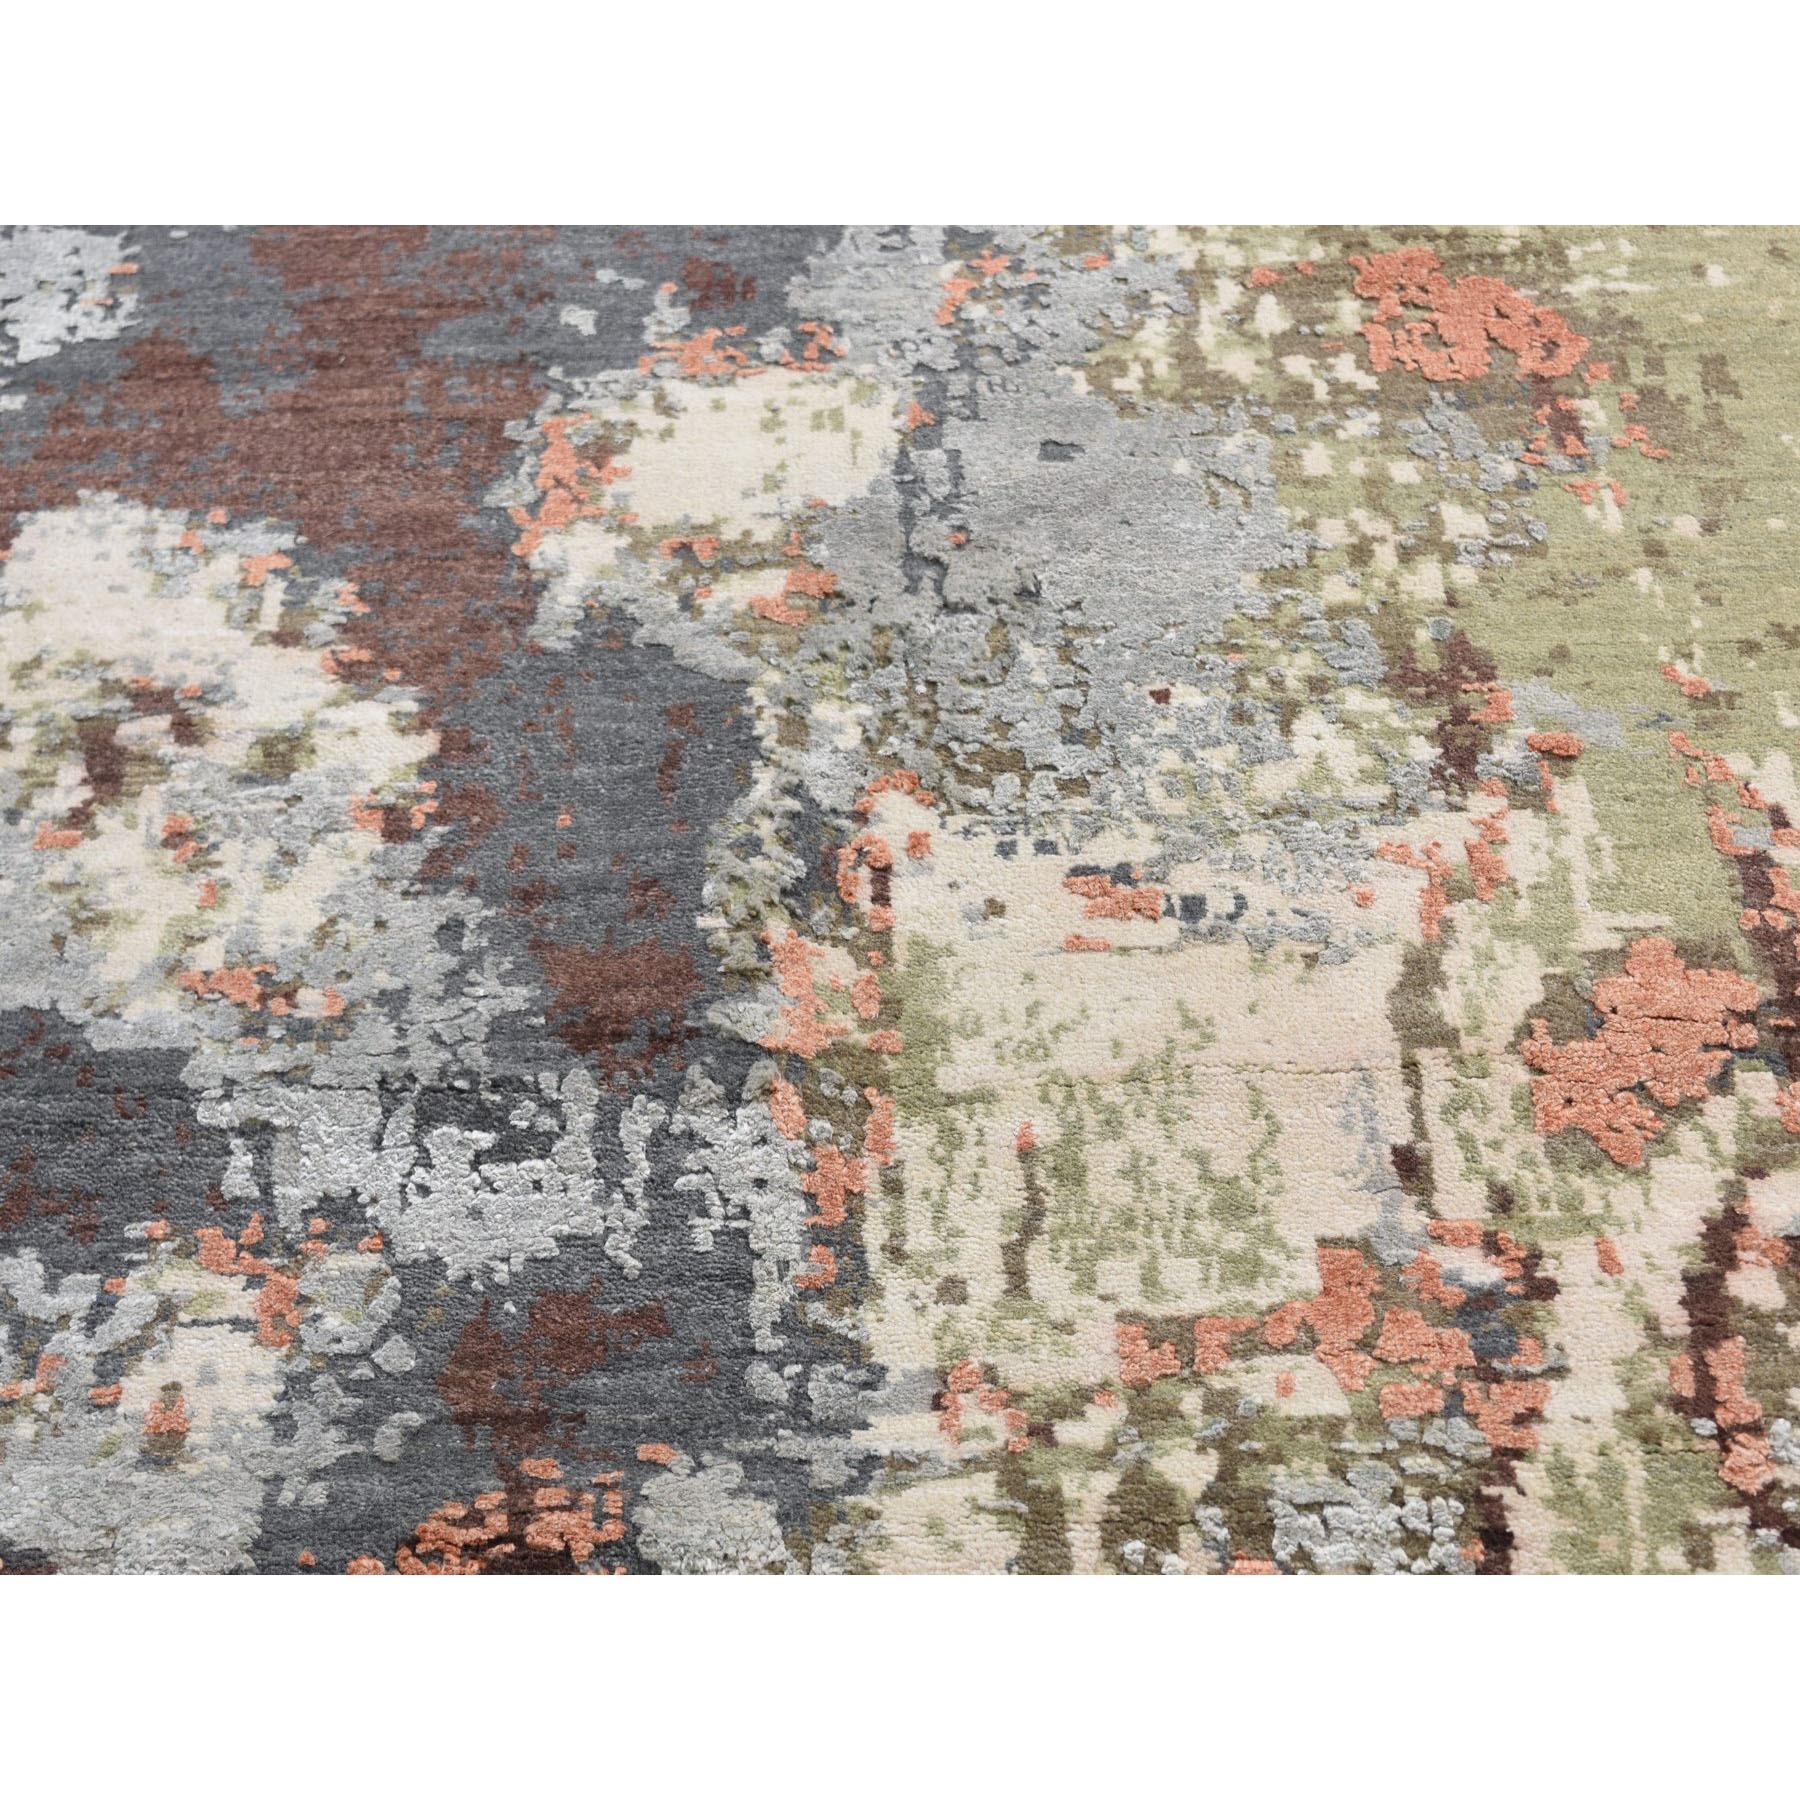 8-10 x12- Terracotta Abstract Design Wool And Pure Silk Hi And Low Pile Hand Knotted Oriental Rug 